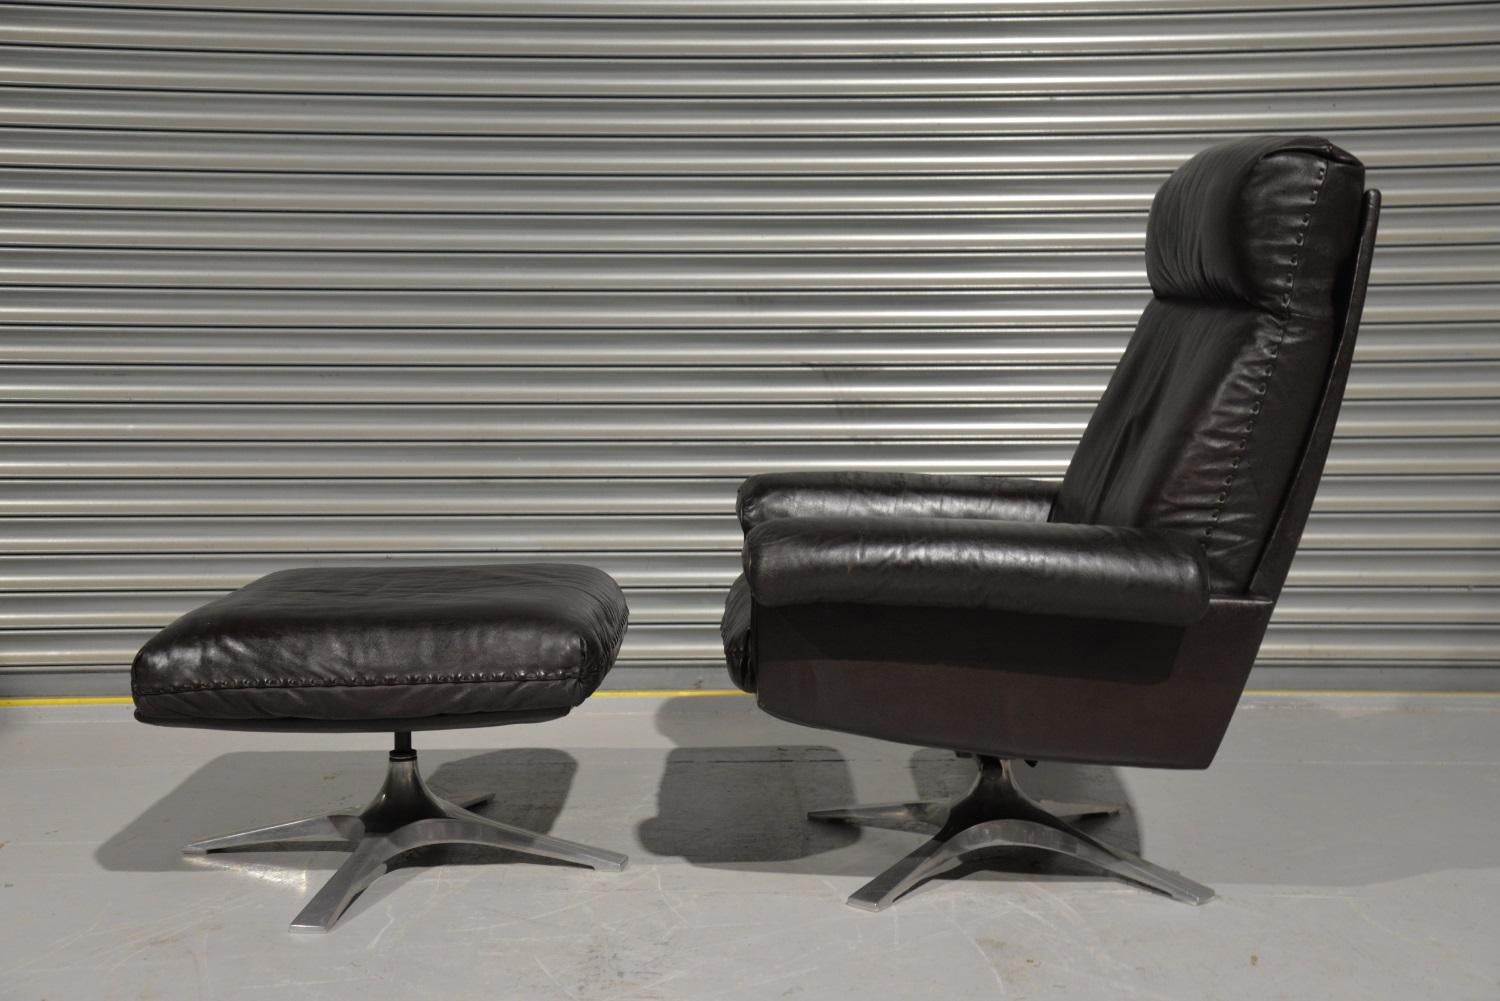 We are delighted to bring to you a highly desirable and rarely available vintage 1970s De Sede DS 31 high back swivel leather armchair with ottoman. Hand built in the 1970s by De Sede craftsman in Switzerland. The swivel leather armchair stands on a